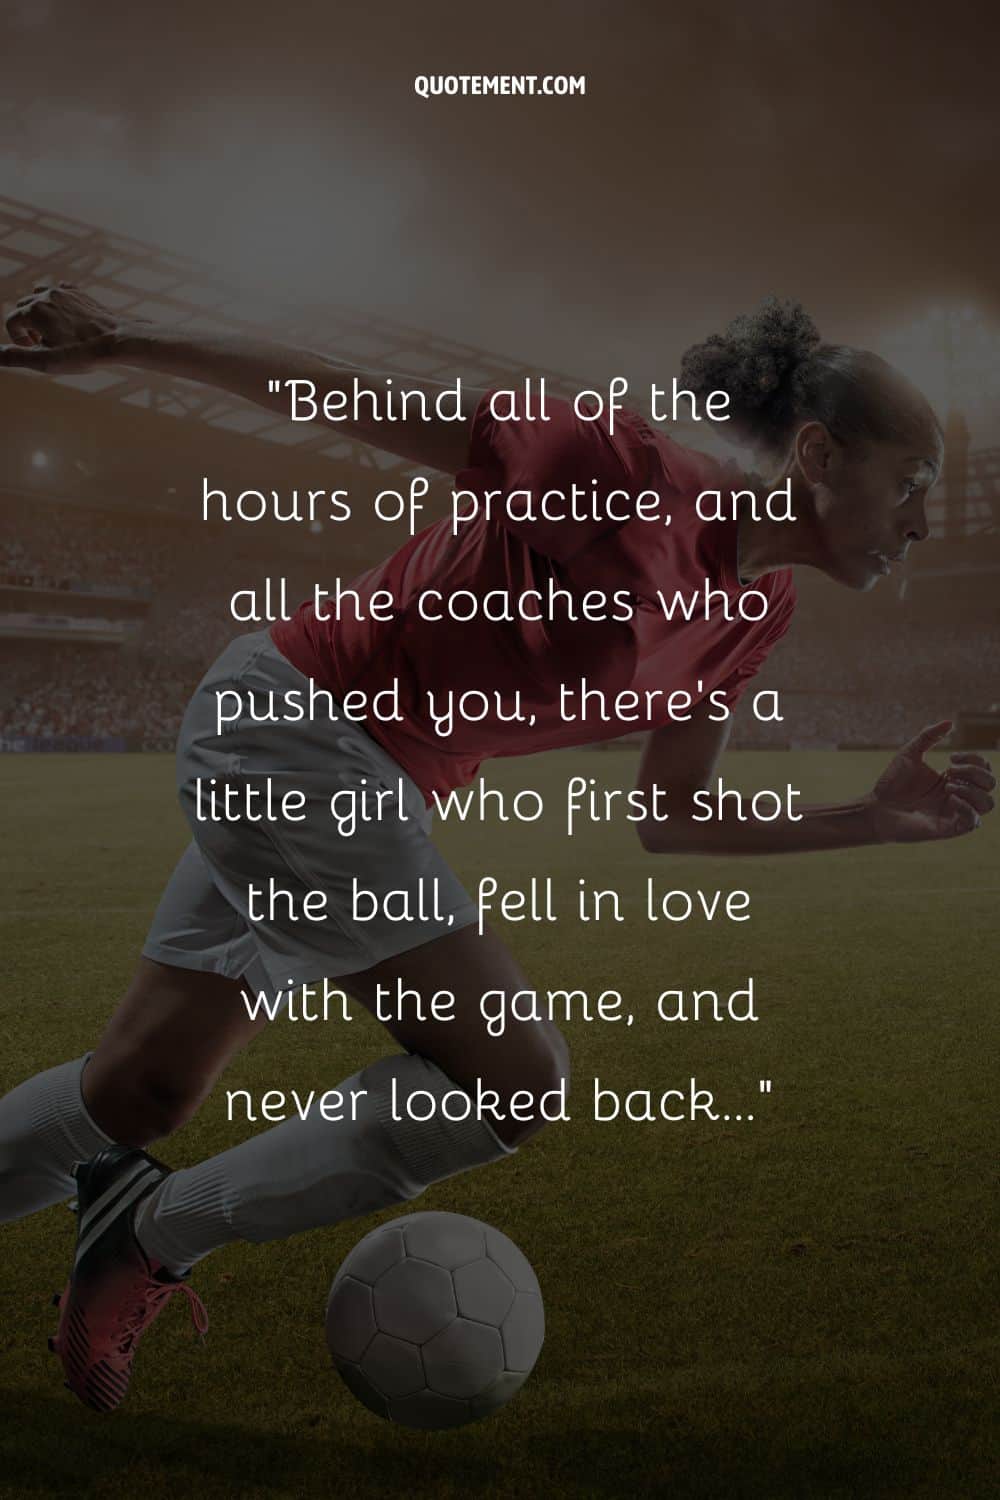 female footballer excels, ball at her feet, representing soccer love quote